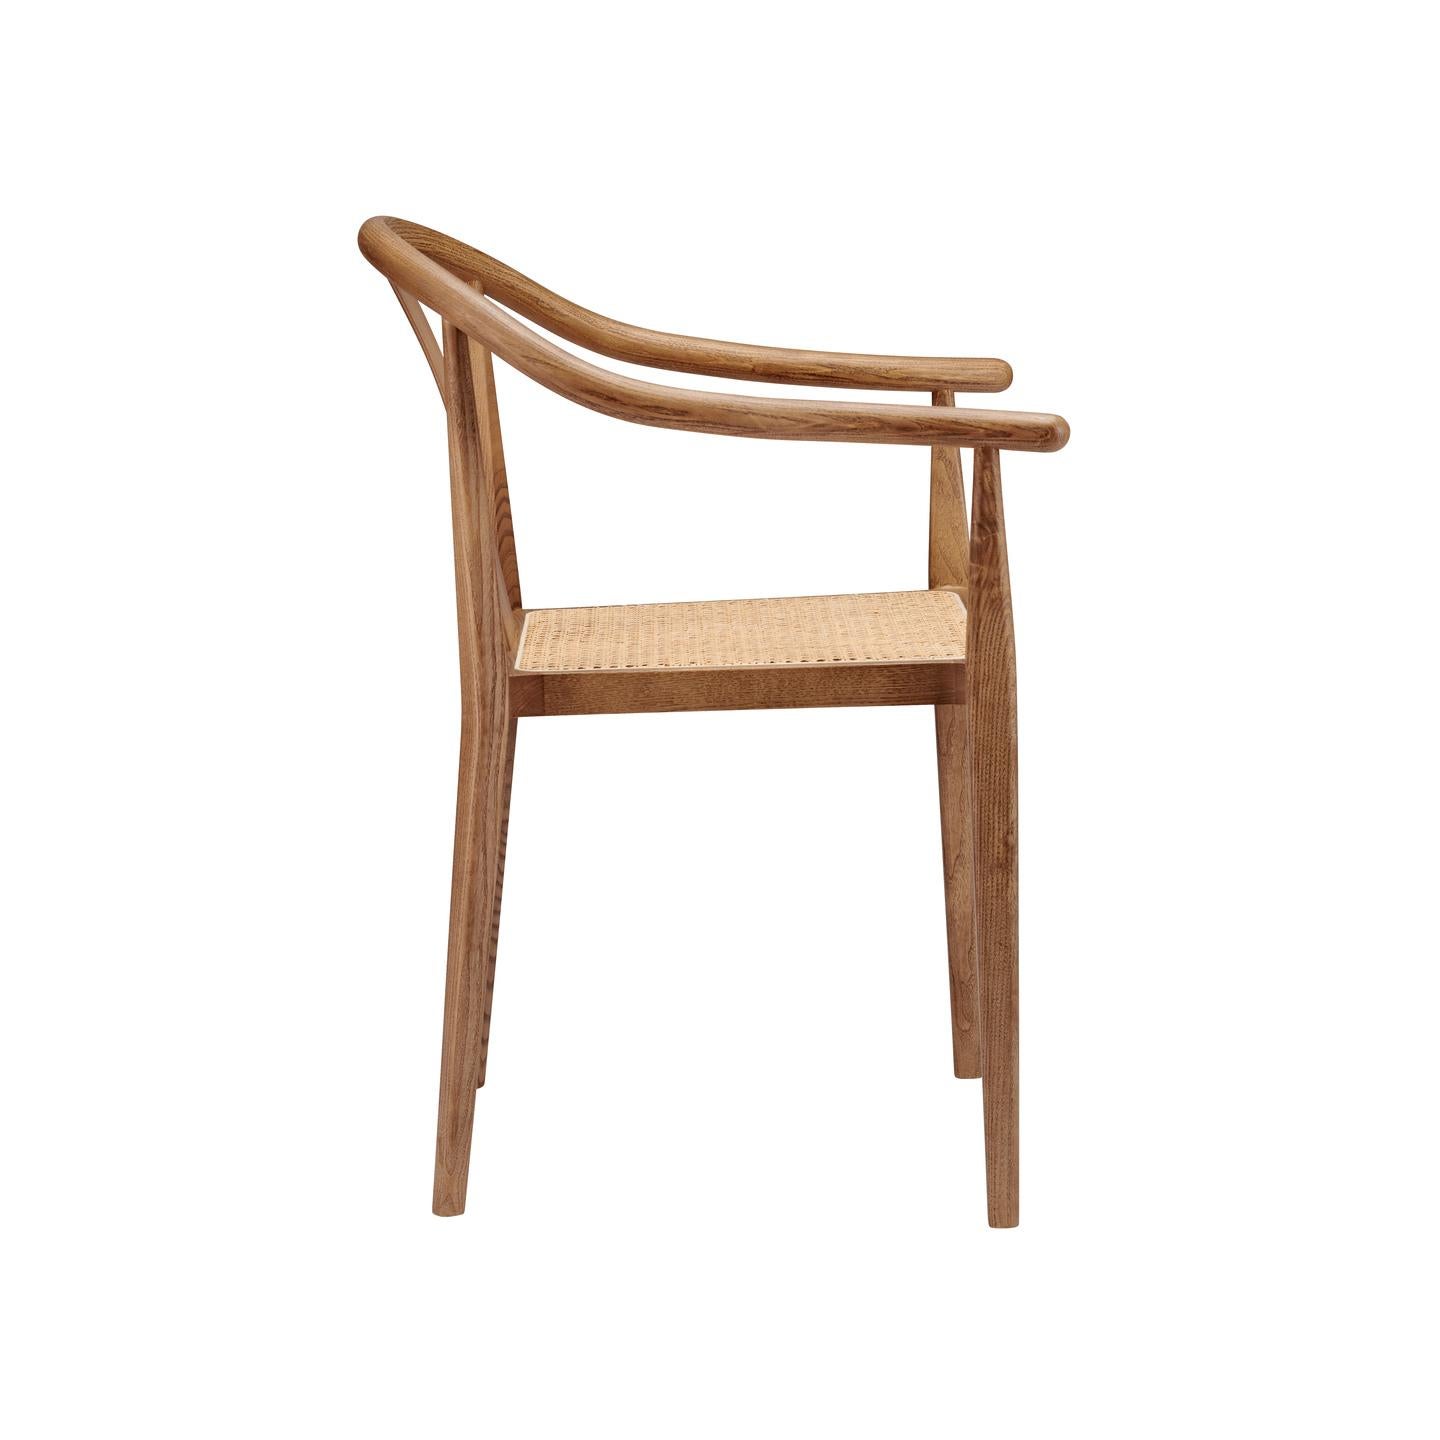 'Shanghai' Chair by Norr11, Light Smoked Oak, Natural Rattan For Sale 5